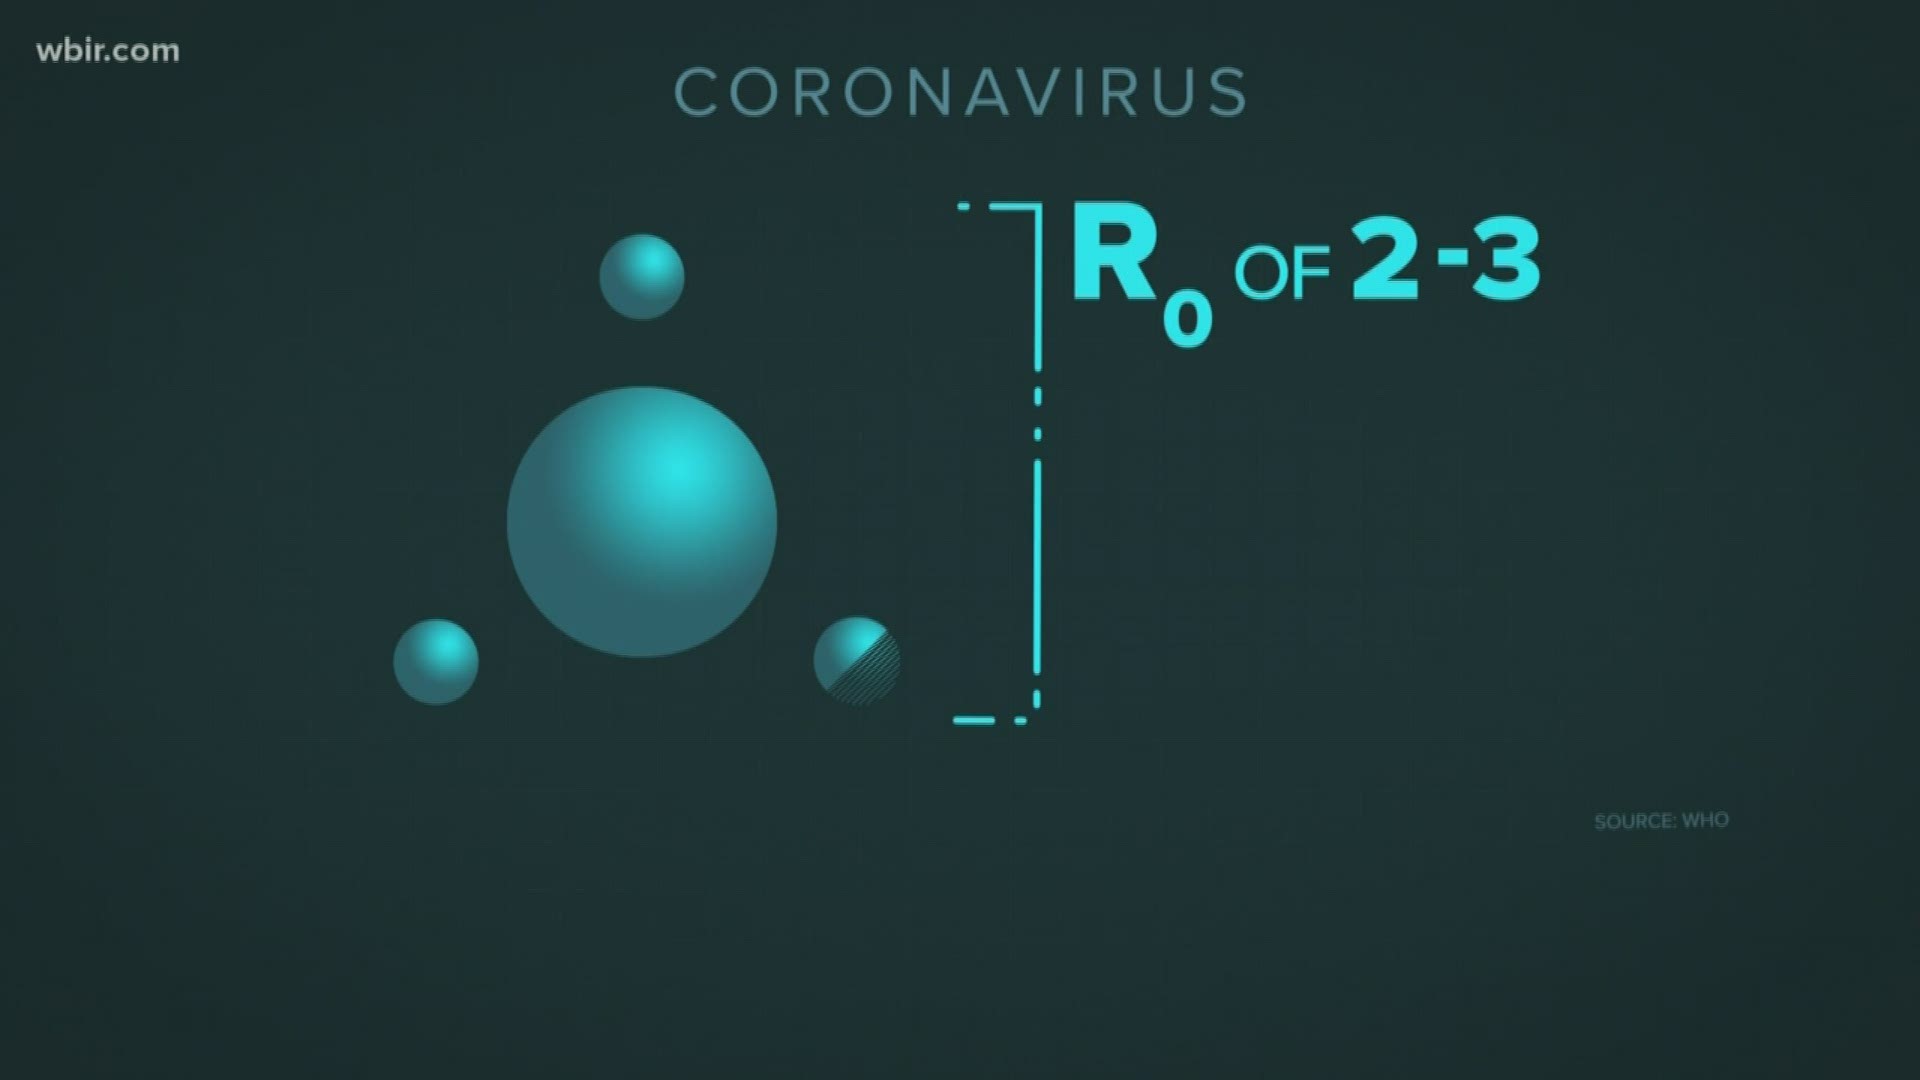 The coronavirus has an r-naught of 2 suggests it's not as harmful, but as of now, no one has protection, which is a big problem.